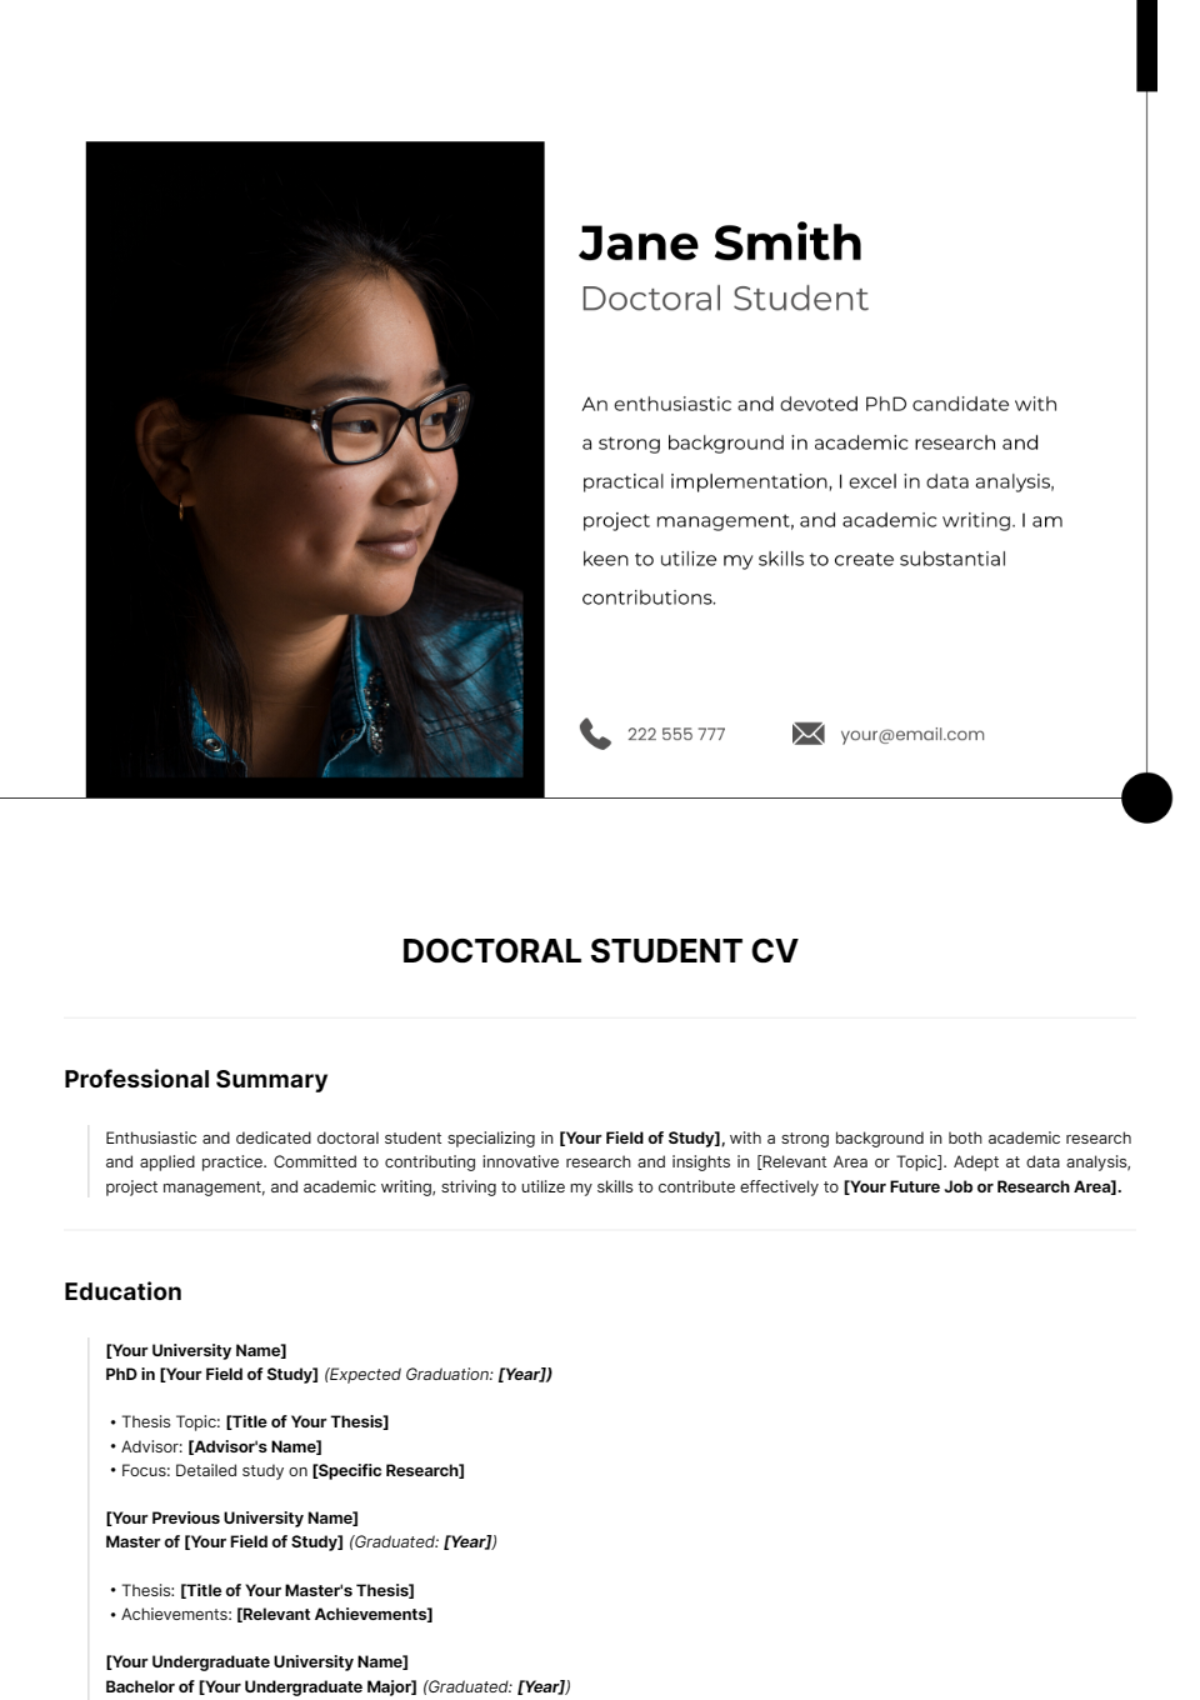 Free Doctoral Student CV Template